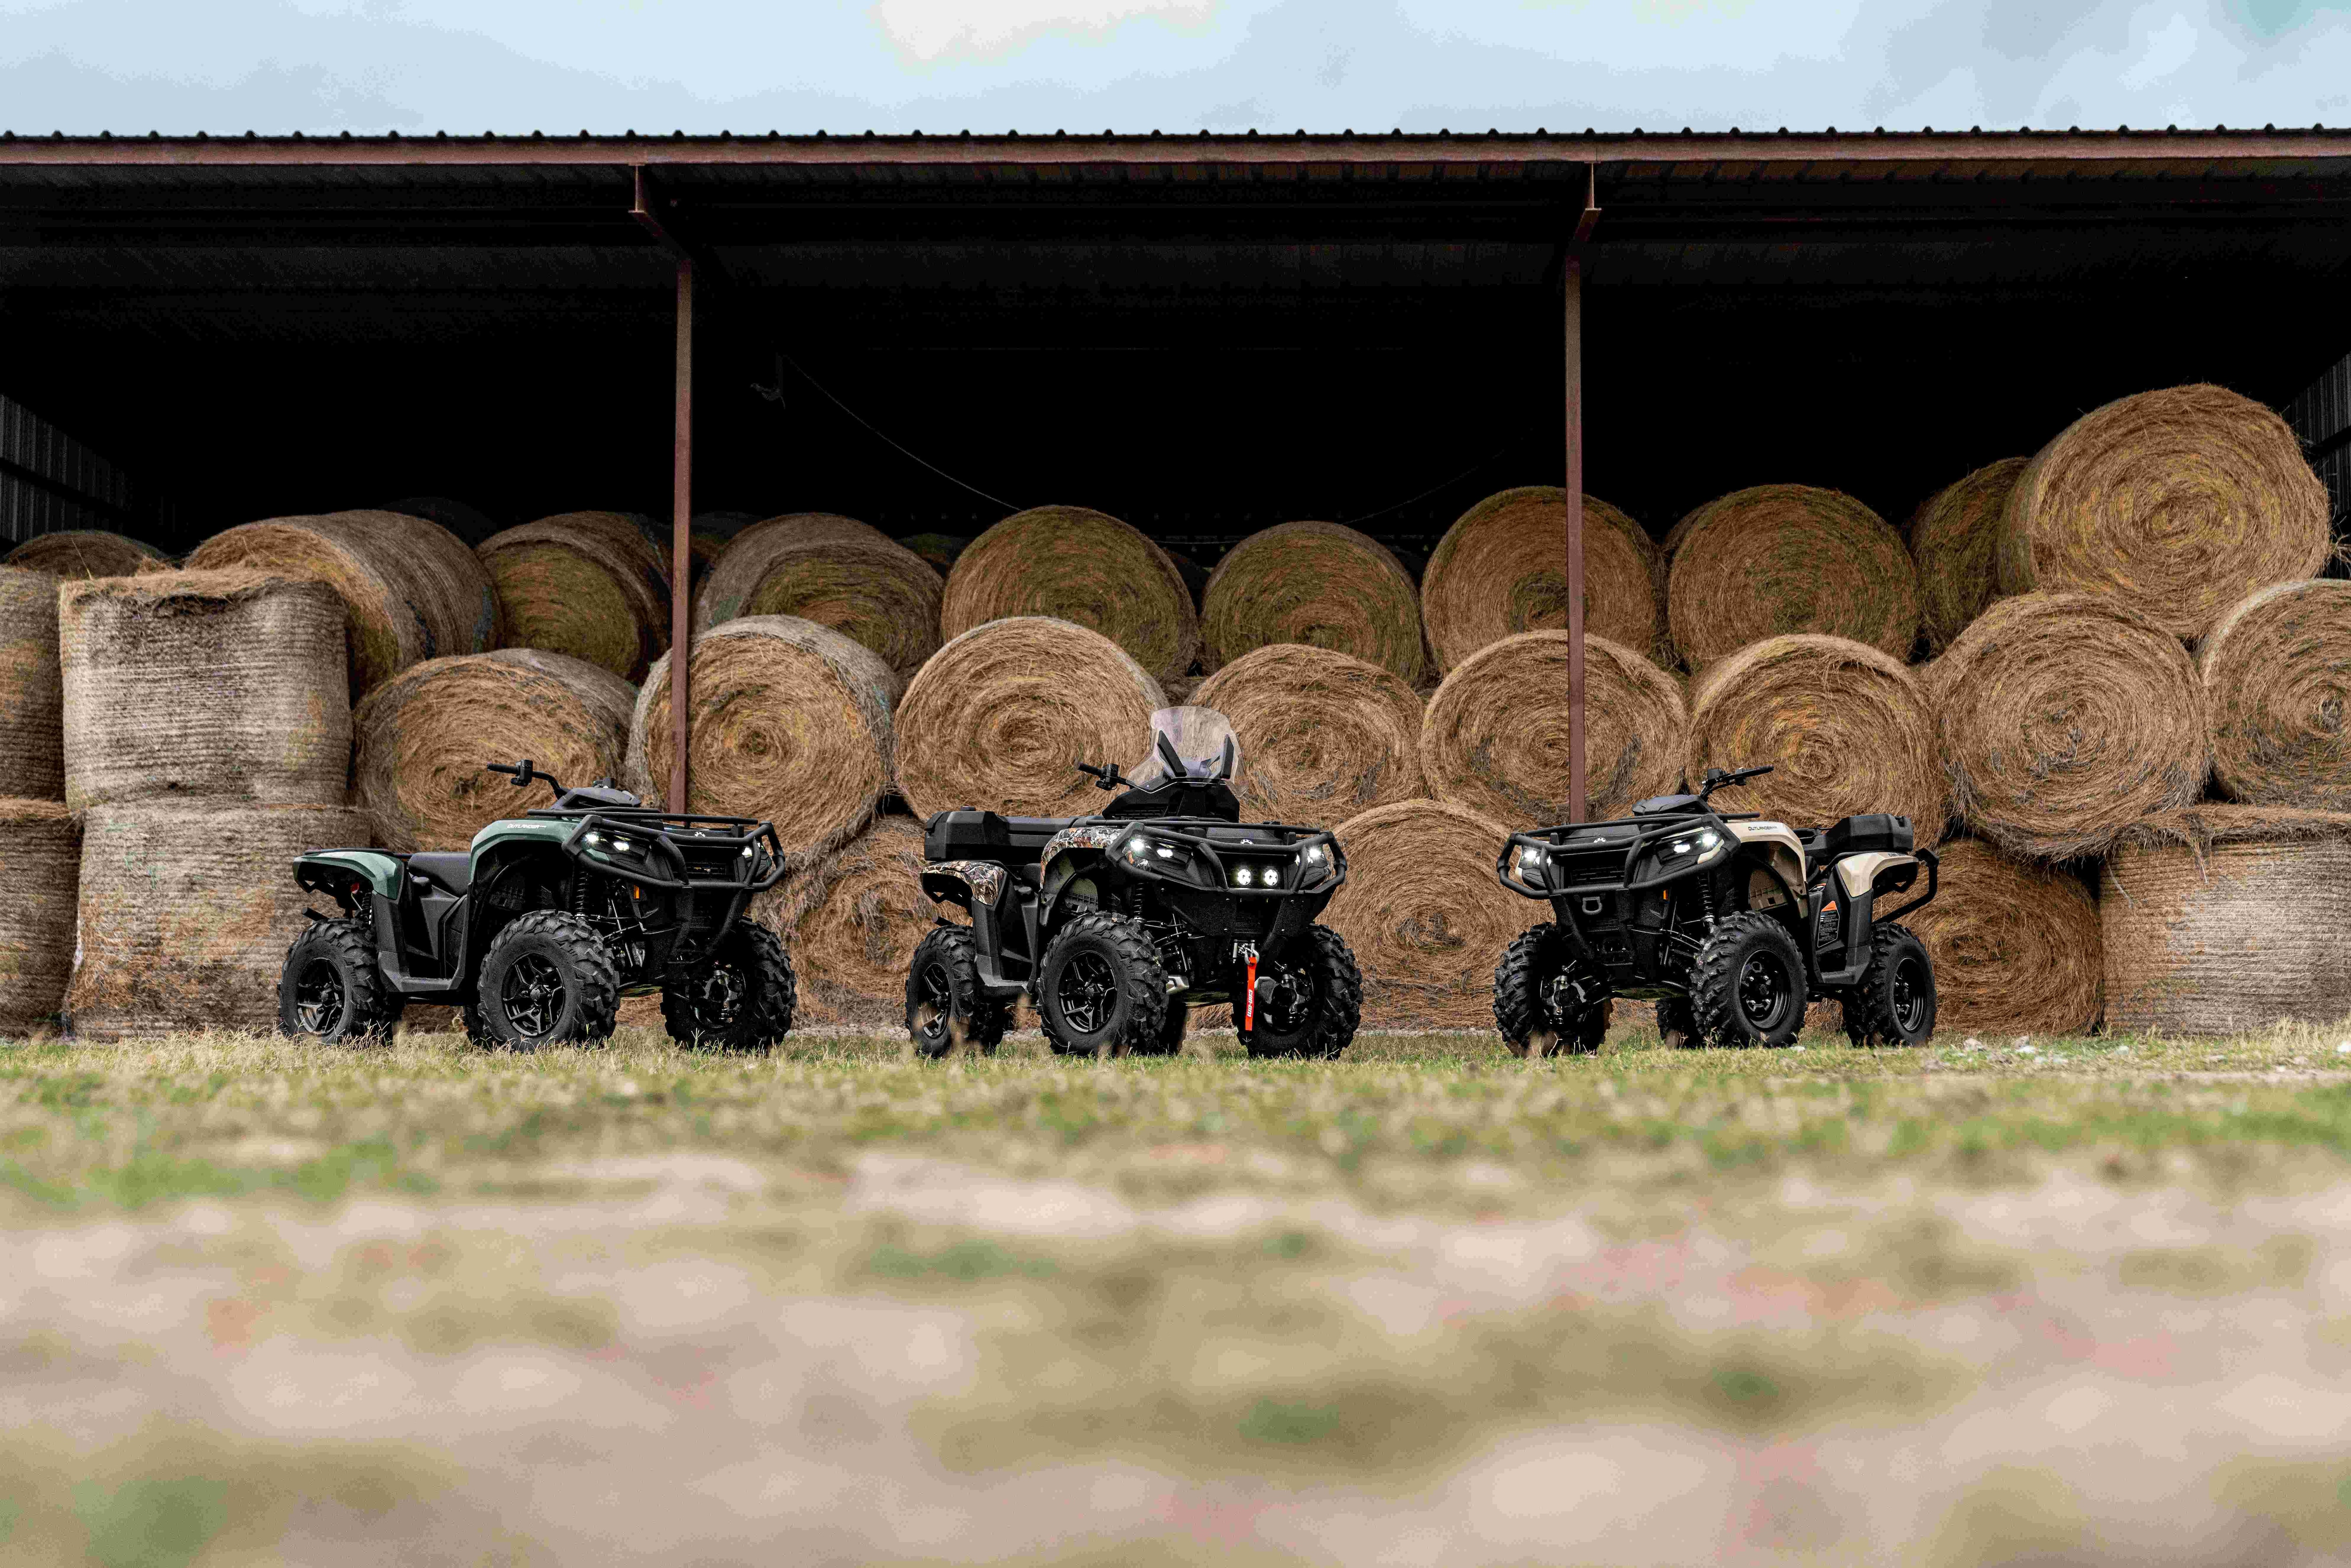 3 Can-Am Outlander Pro parked in front of a barn.